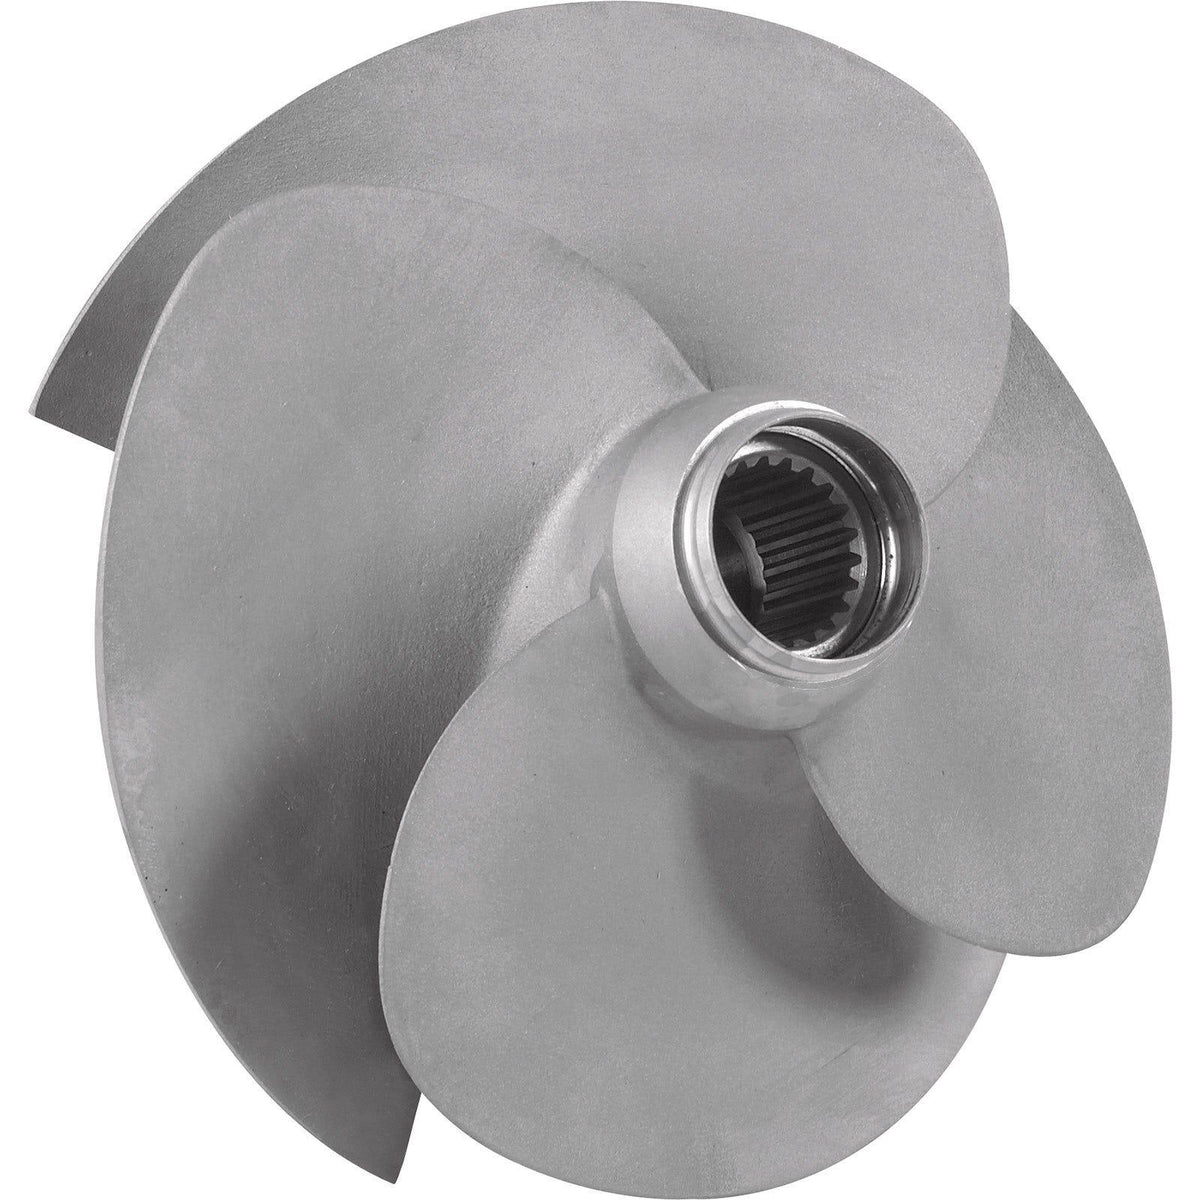 GTX 155 and WAKE 155 (2018-2019) Impeller